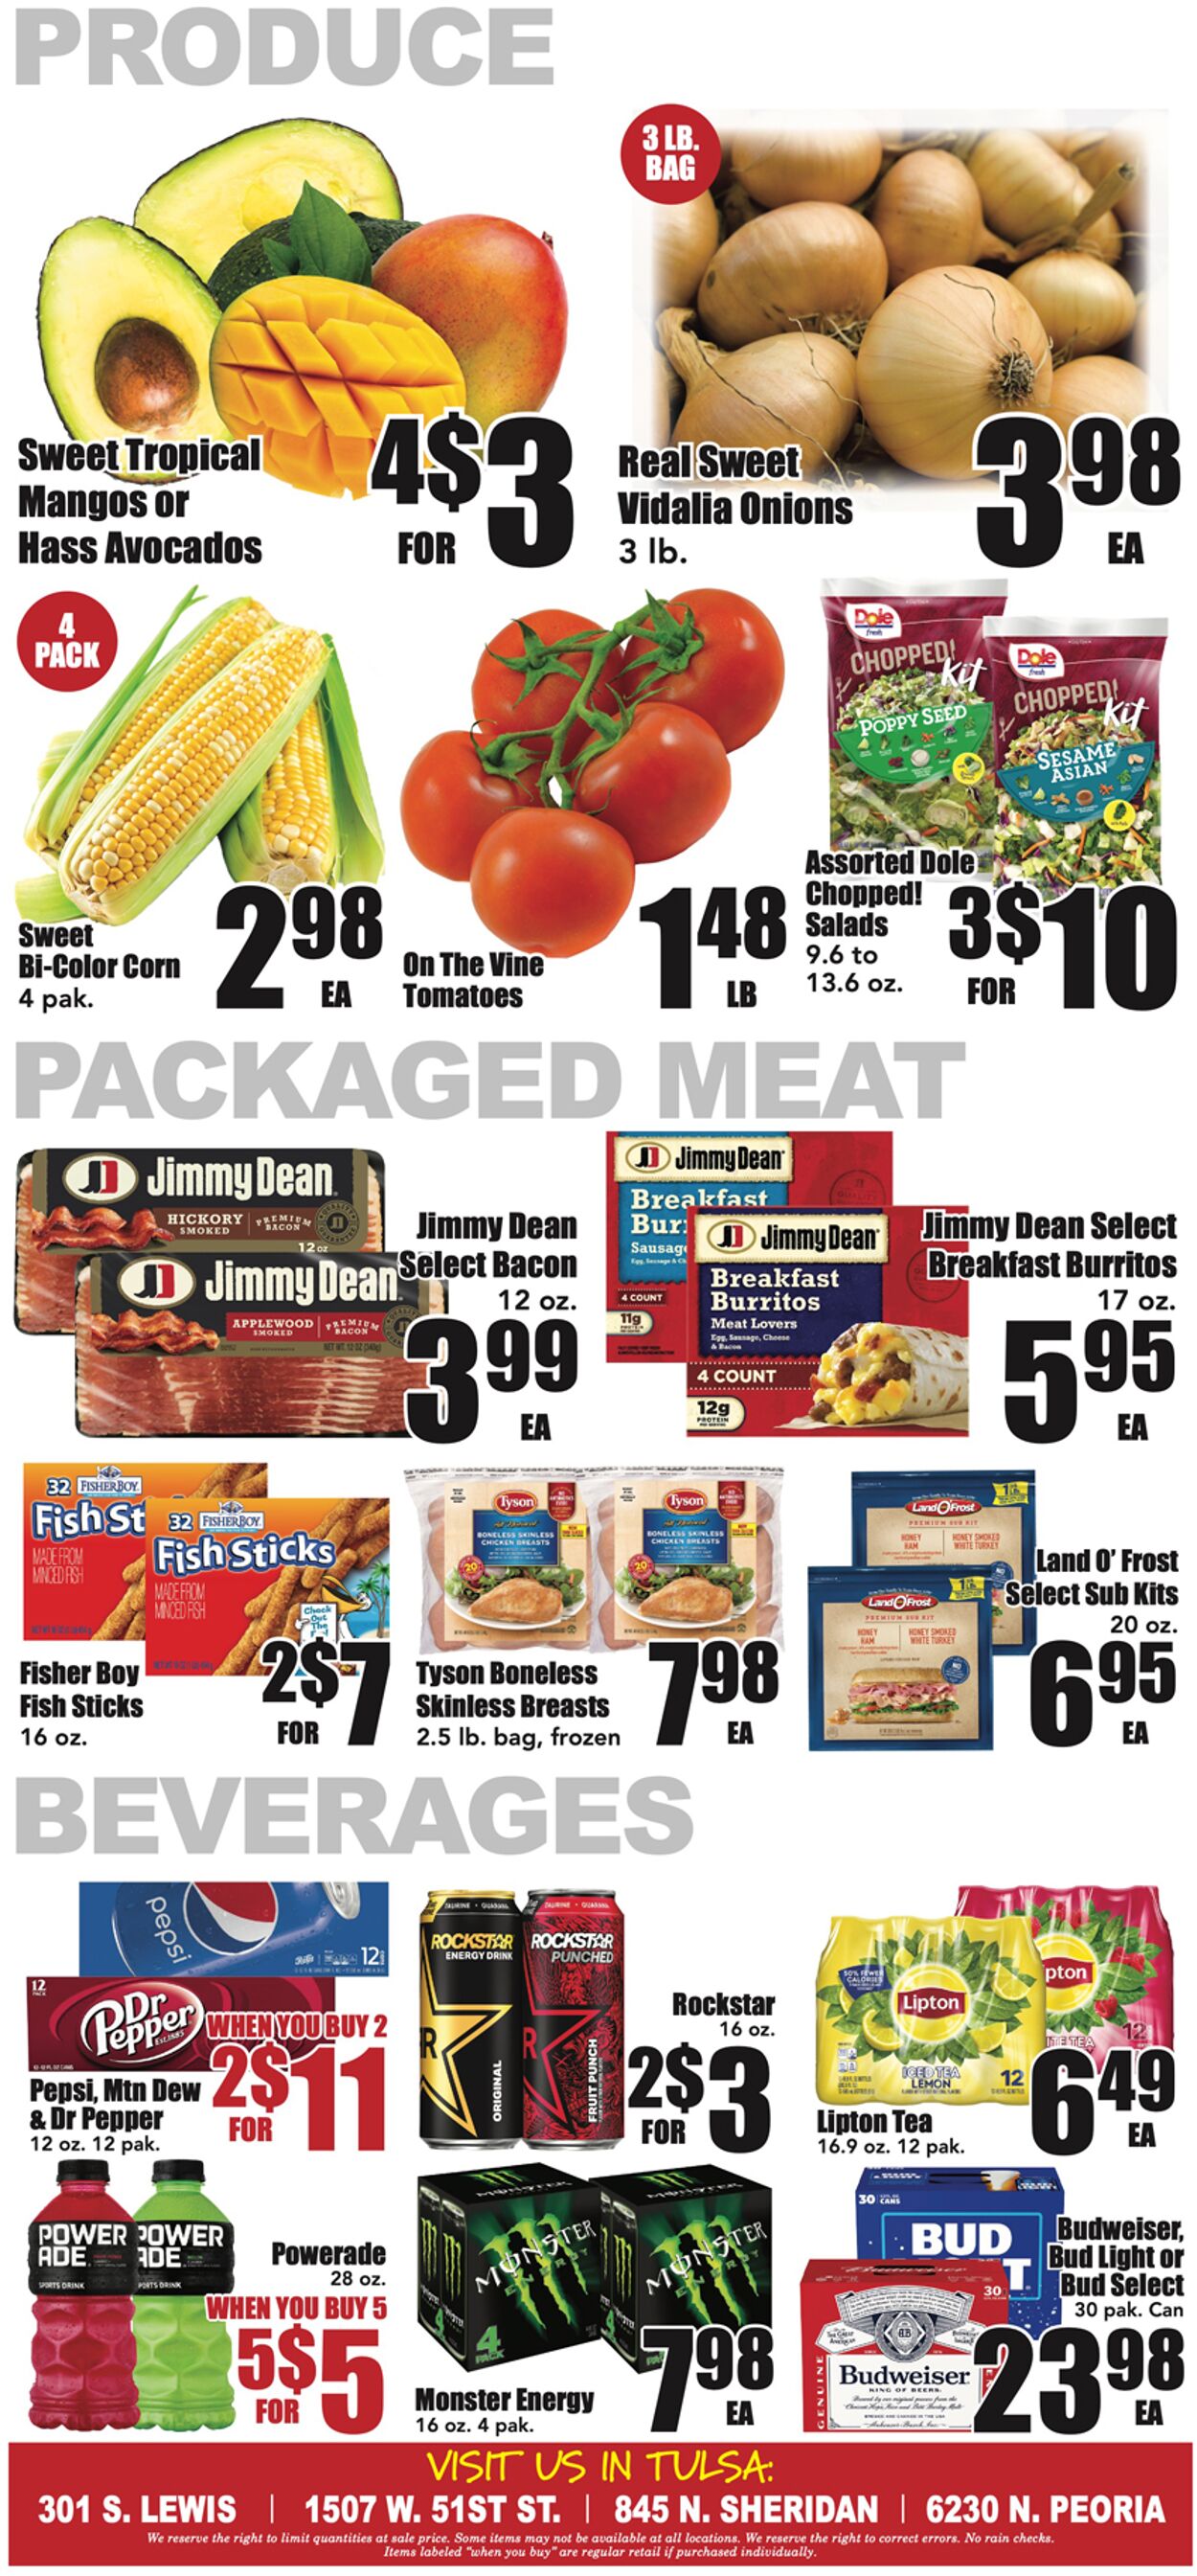 Warehouse Market Ad from 05/10/2023